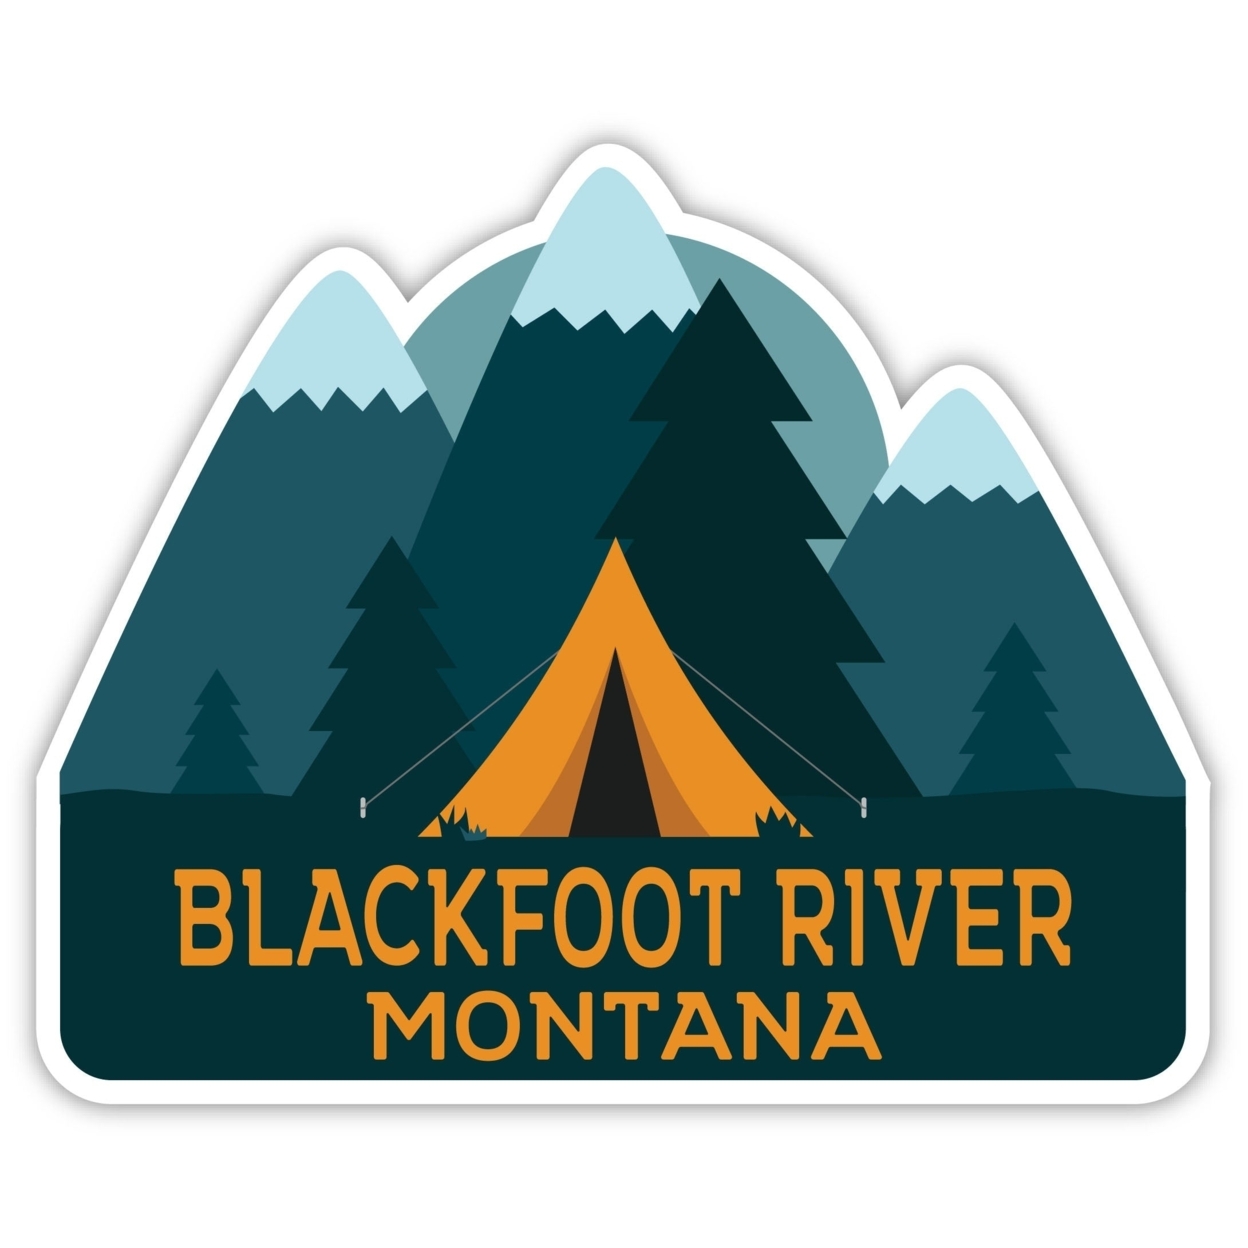 Blackfoot River Montana Souvenir Decorative Stickers (Choose Theme And Size) - 4-Pack, 2-Inch, Tent